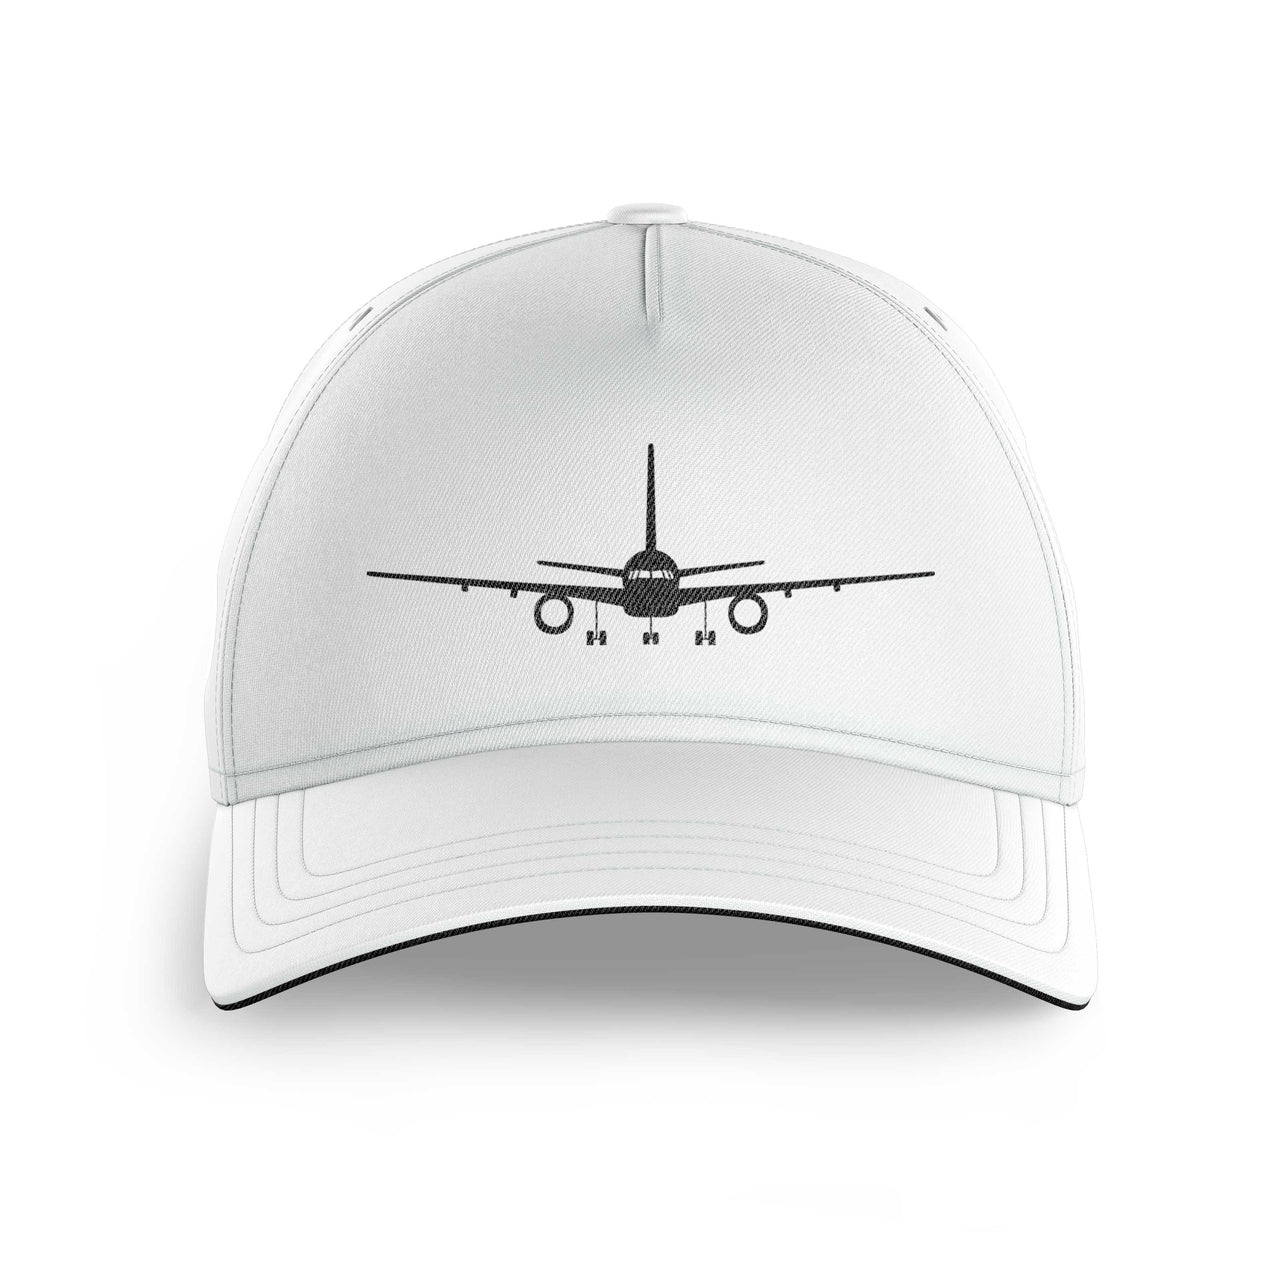 Boeing 757 Silhouette Printed Hats